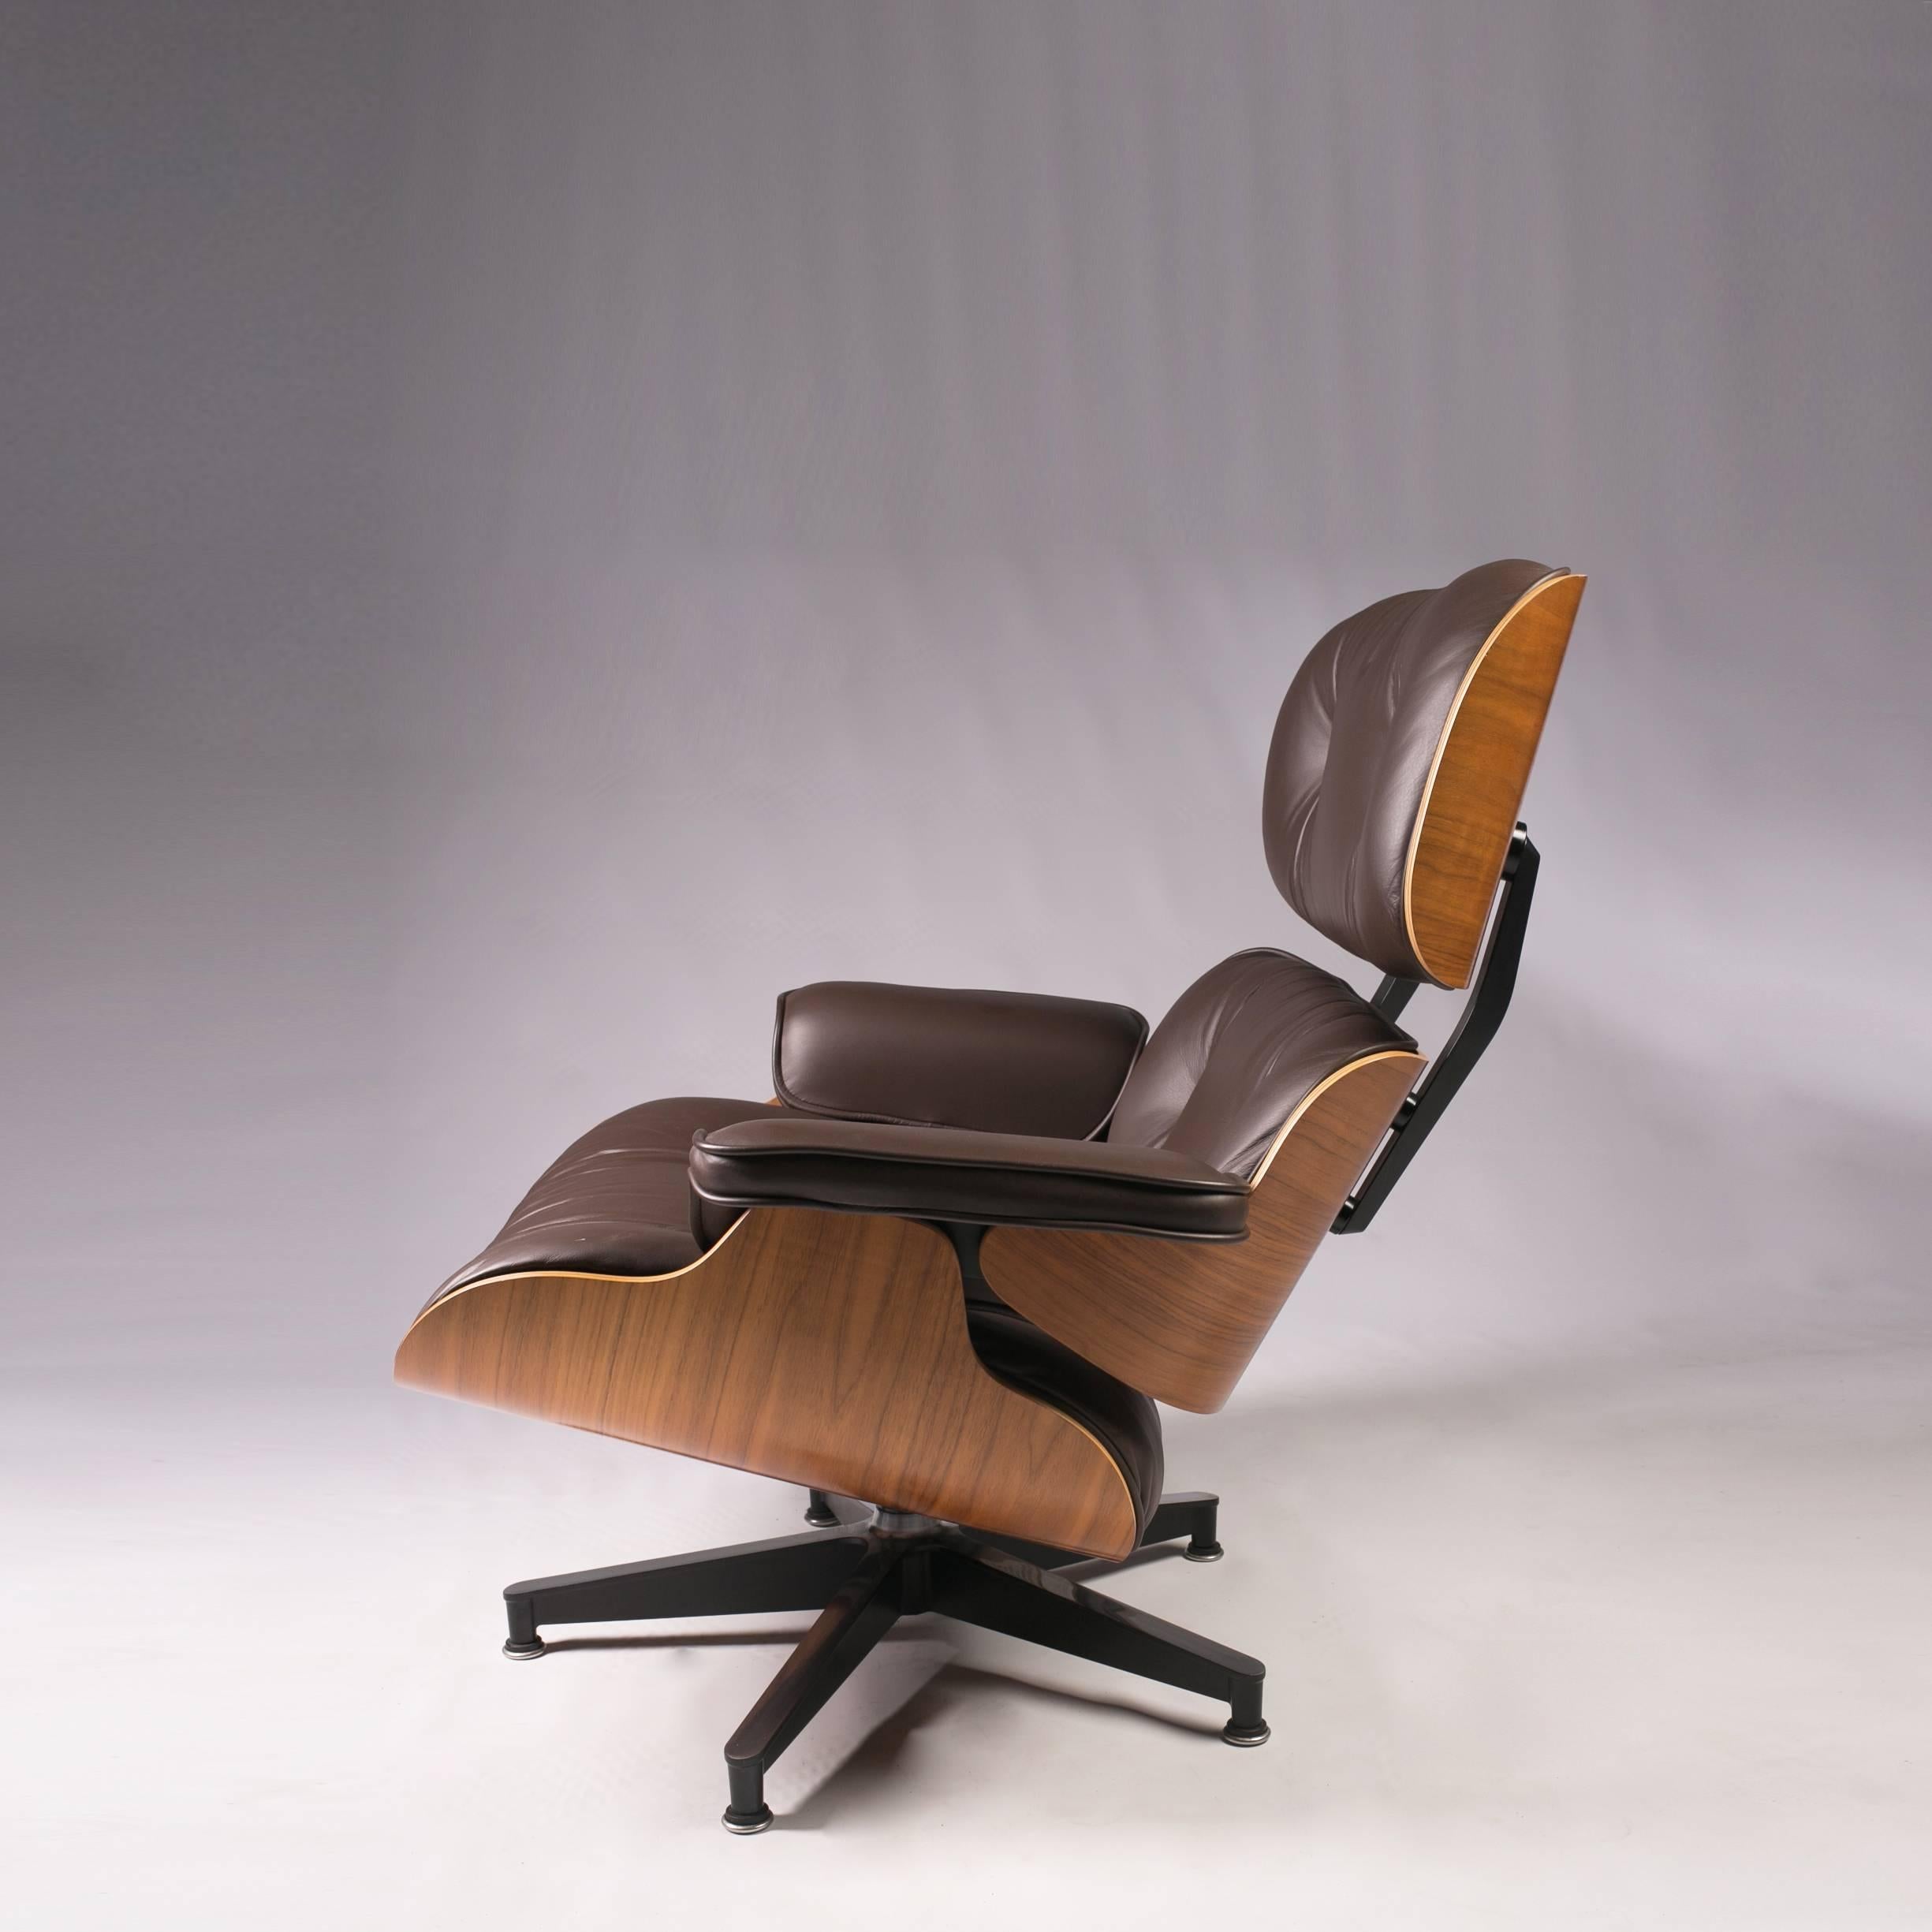 American Mid-Century Modern Chair and Ottoman by Charles and Ray Eames